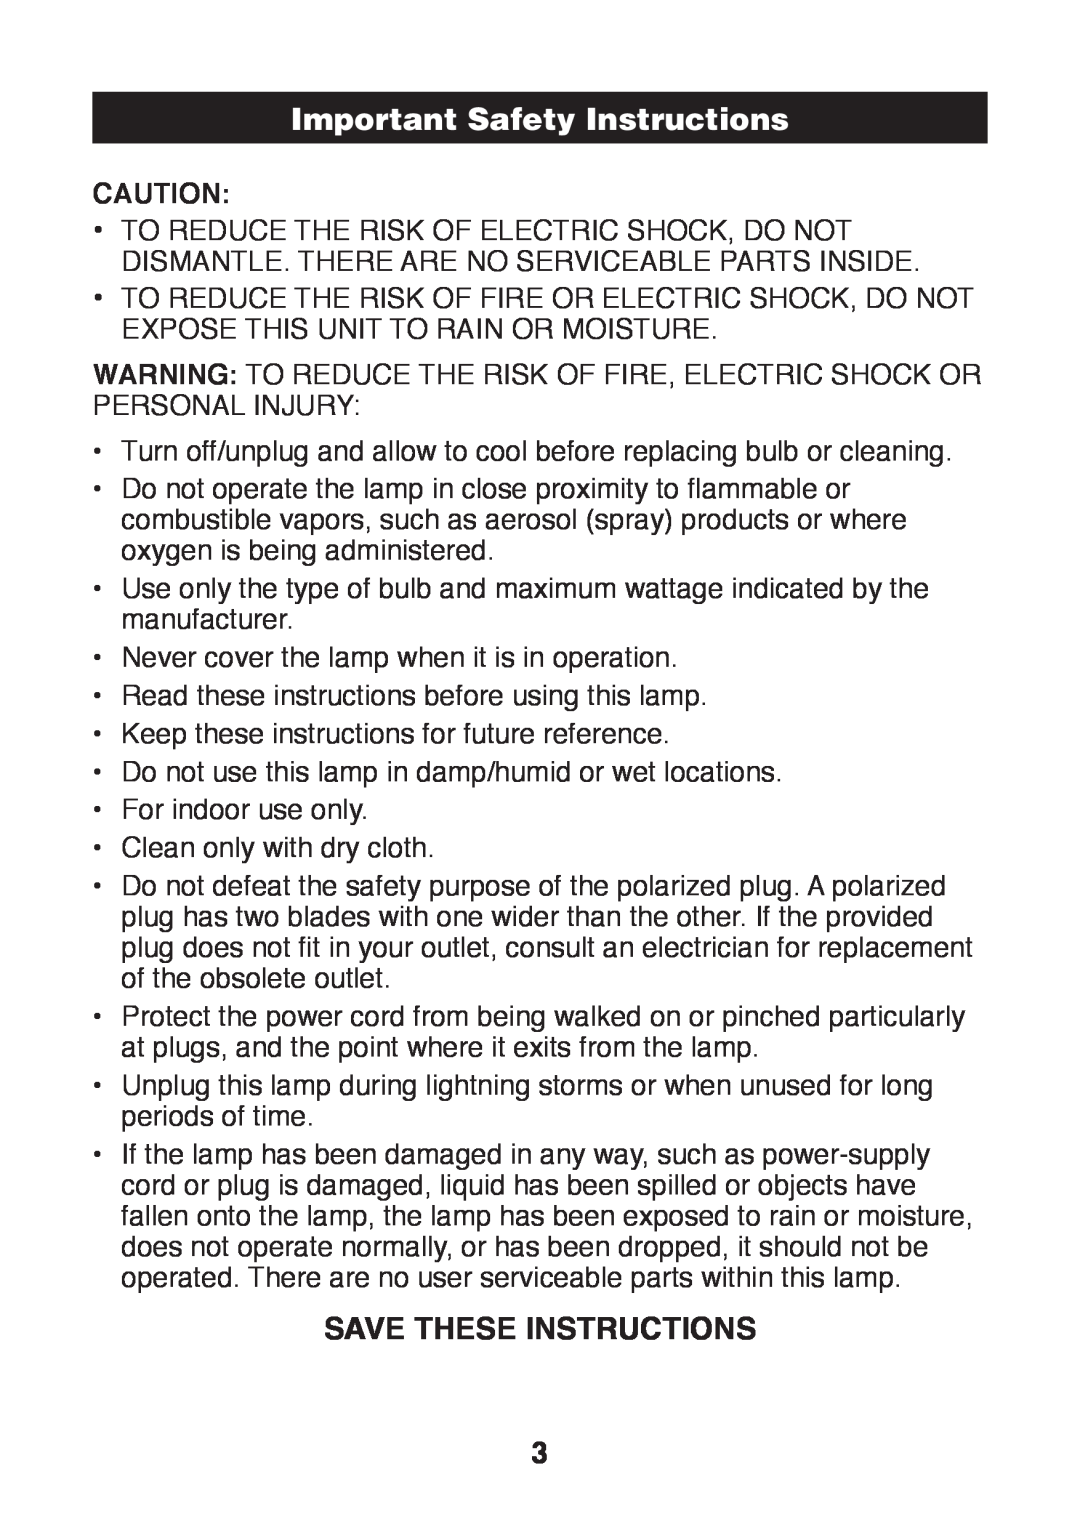 Planet Technology PL05 manual Important Safety Instructions, Save These Instructions 